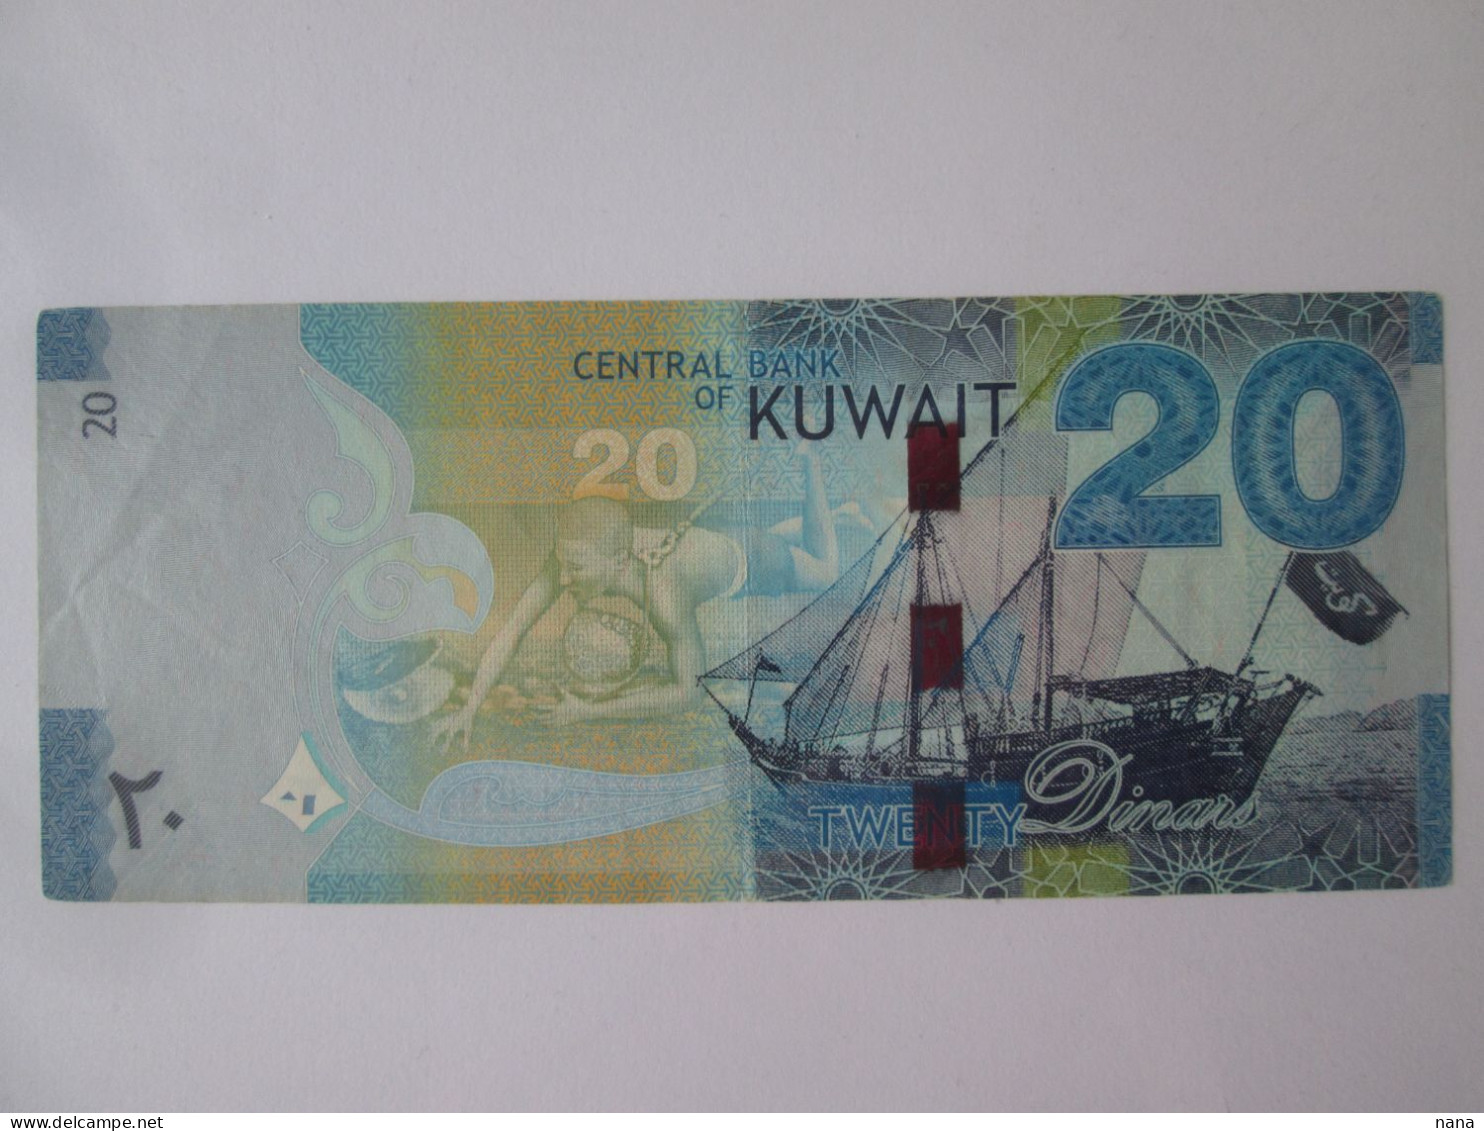 Rare! Kuwait 20 Dinars 2014 Banknote Serie 619991,see Pictures - Koeweit